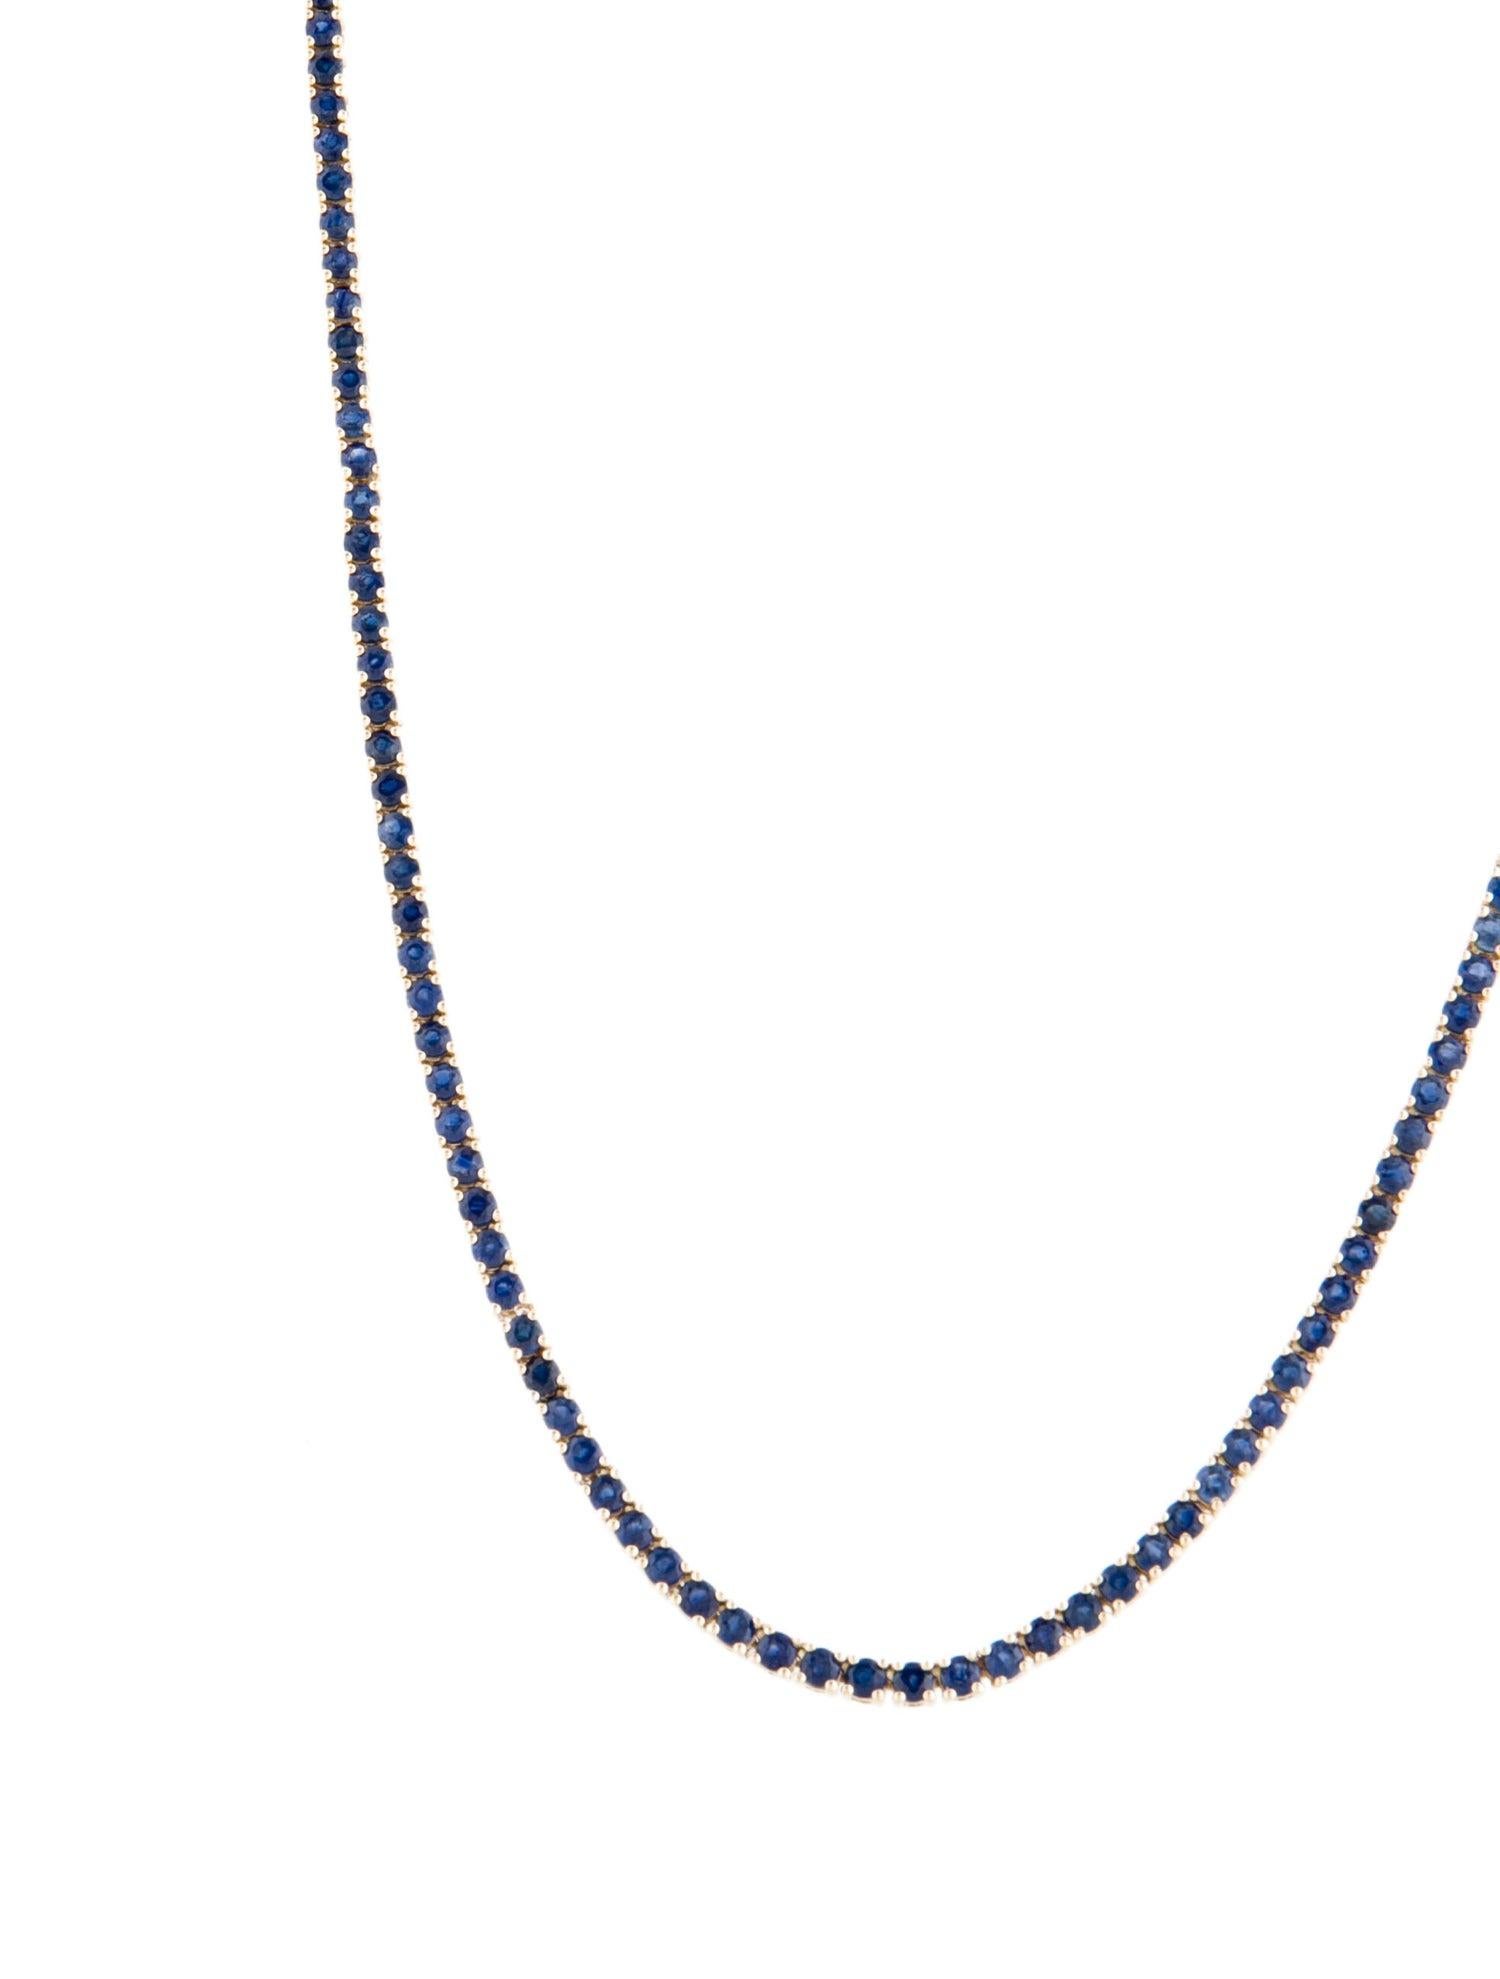 Brilliant Cut 14K Sapphire Chain Necklace 15.26ctw - Exquisite & Timeless Jewelry Piece For Sale